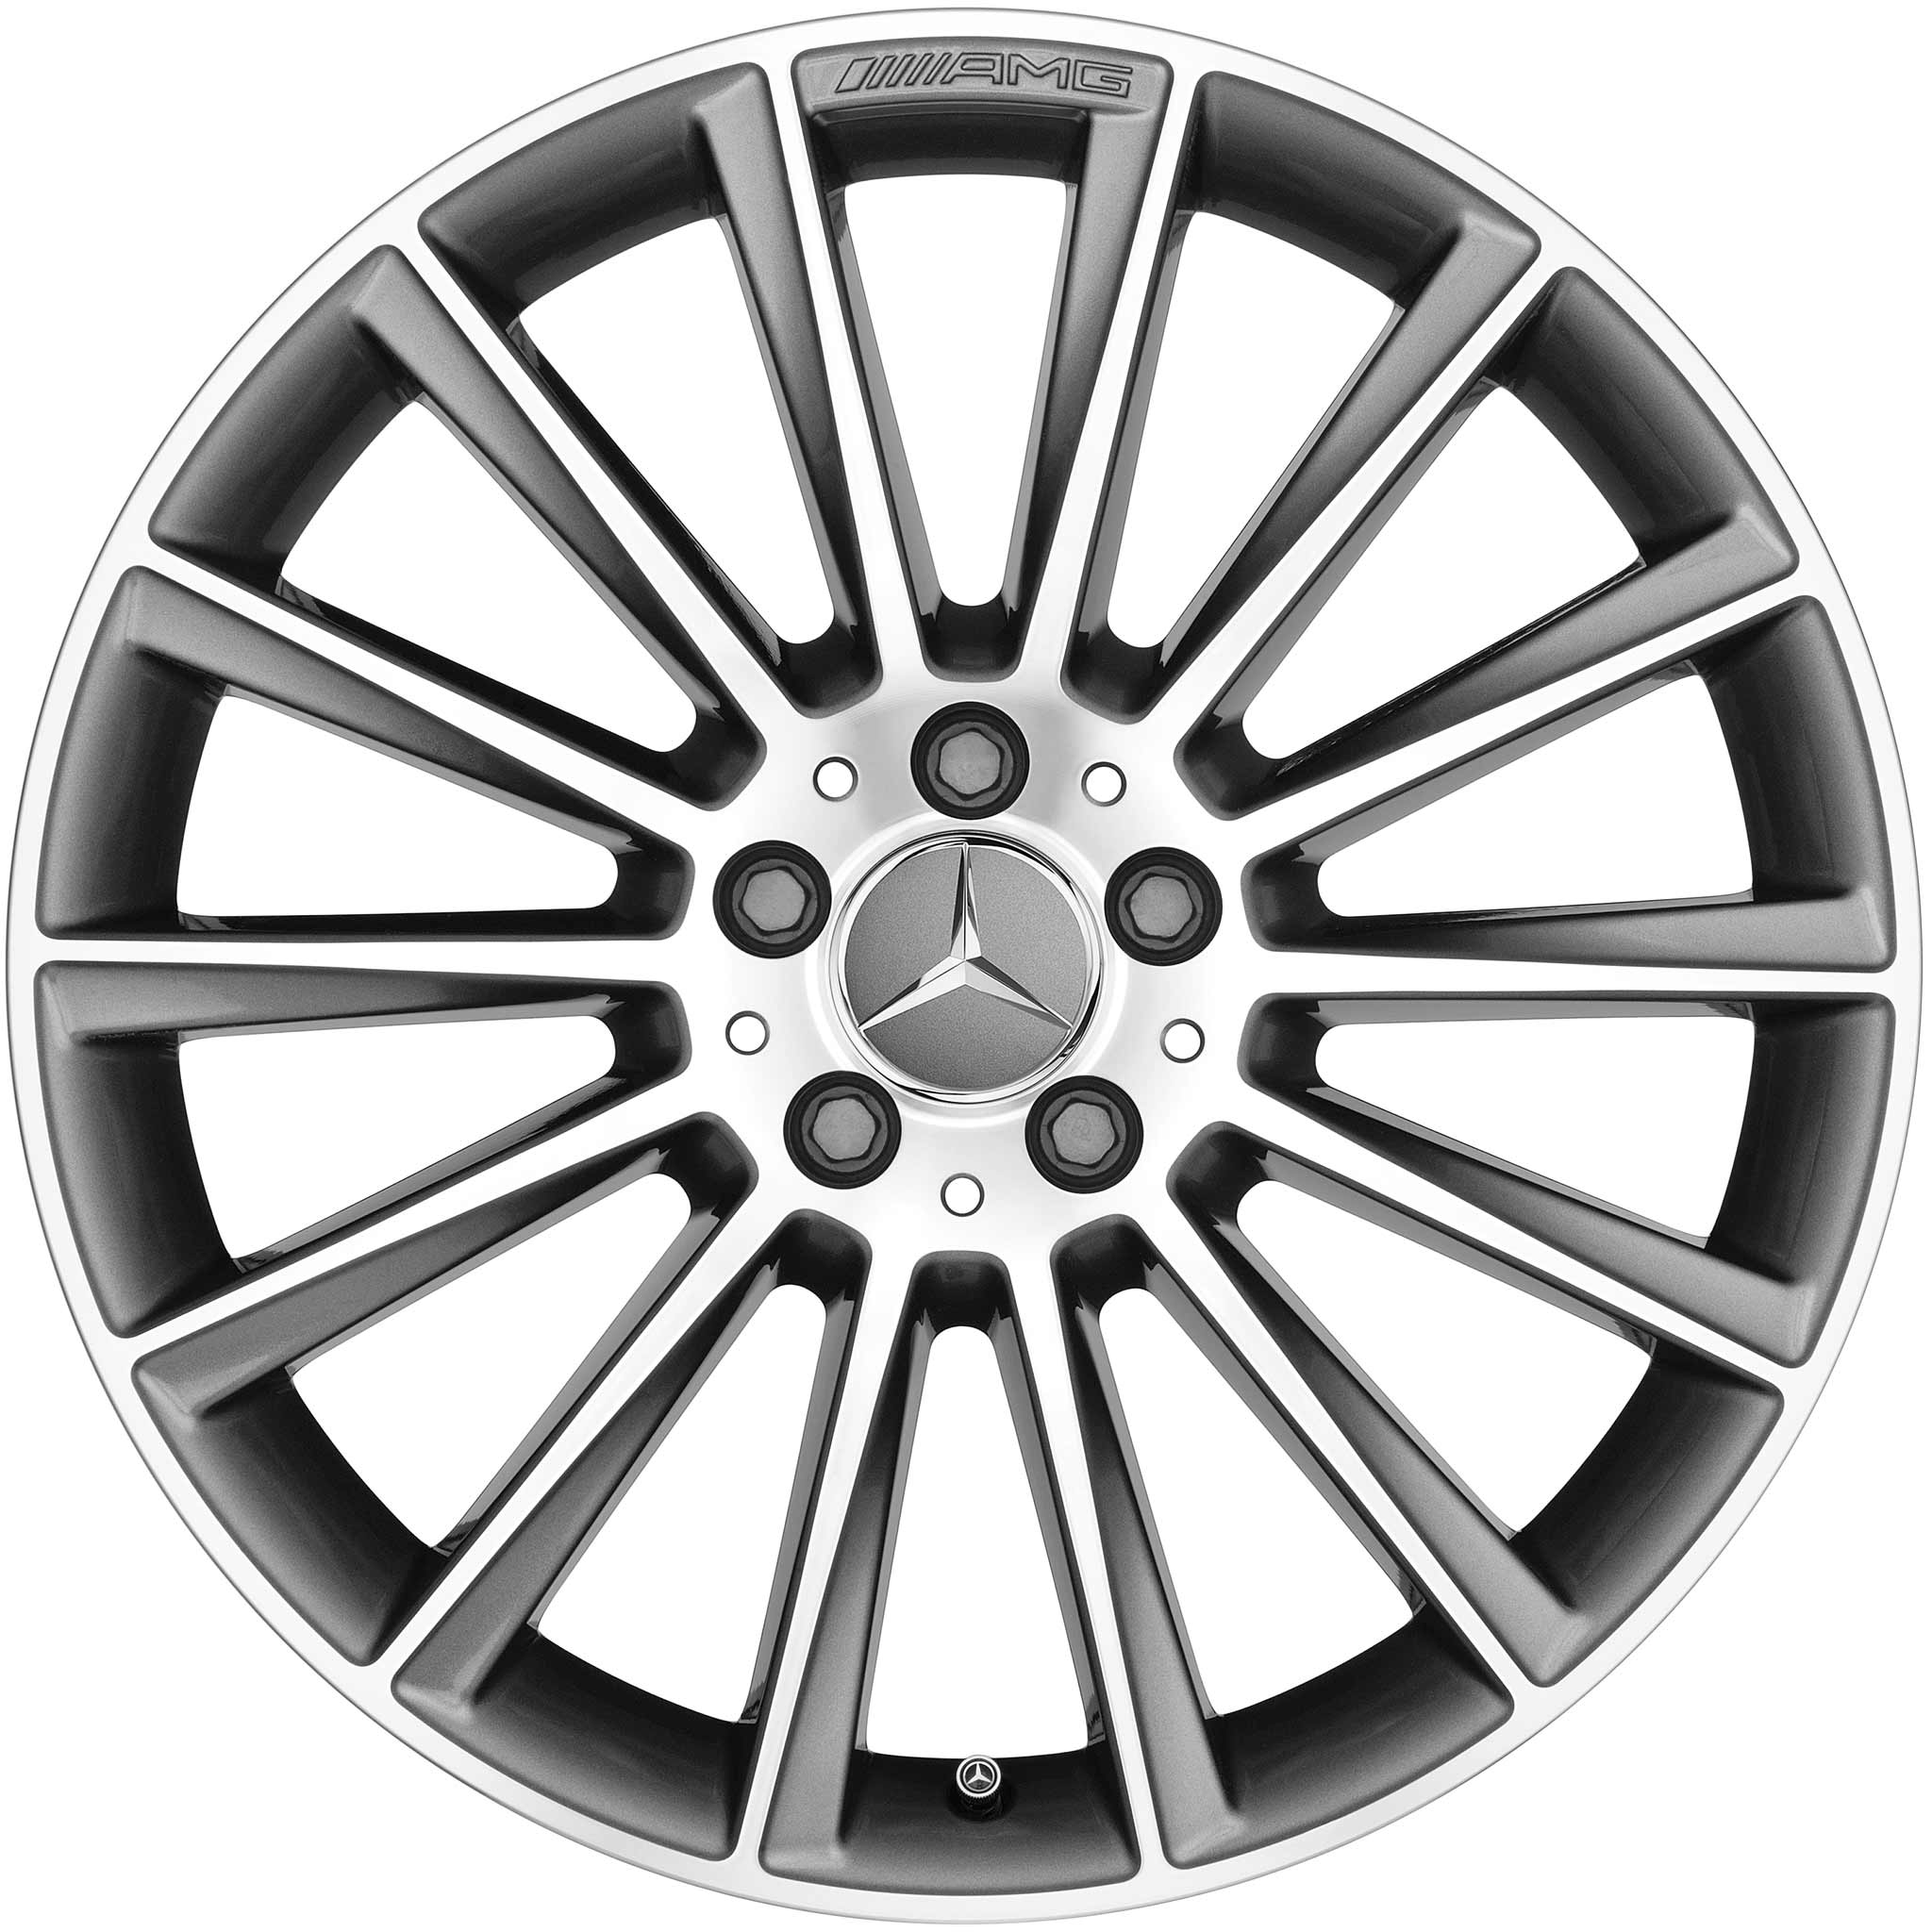 Mercedes C-Class W205 Tuning with Alloy Wheels 20 inch from